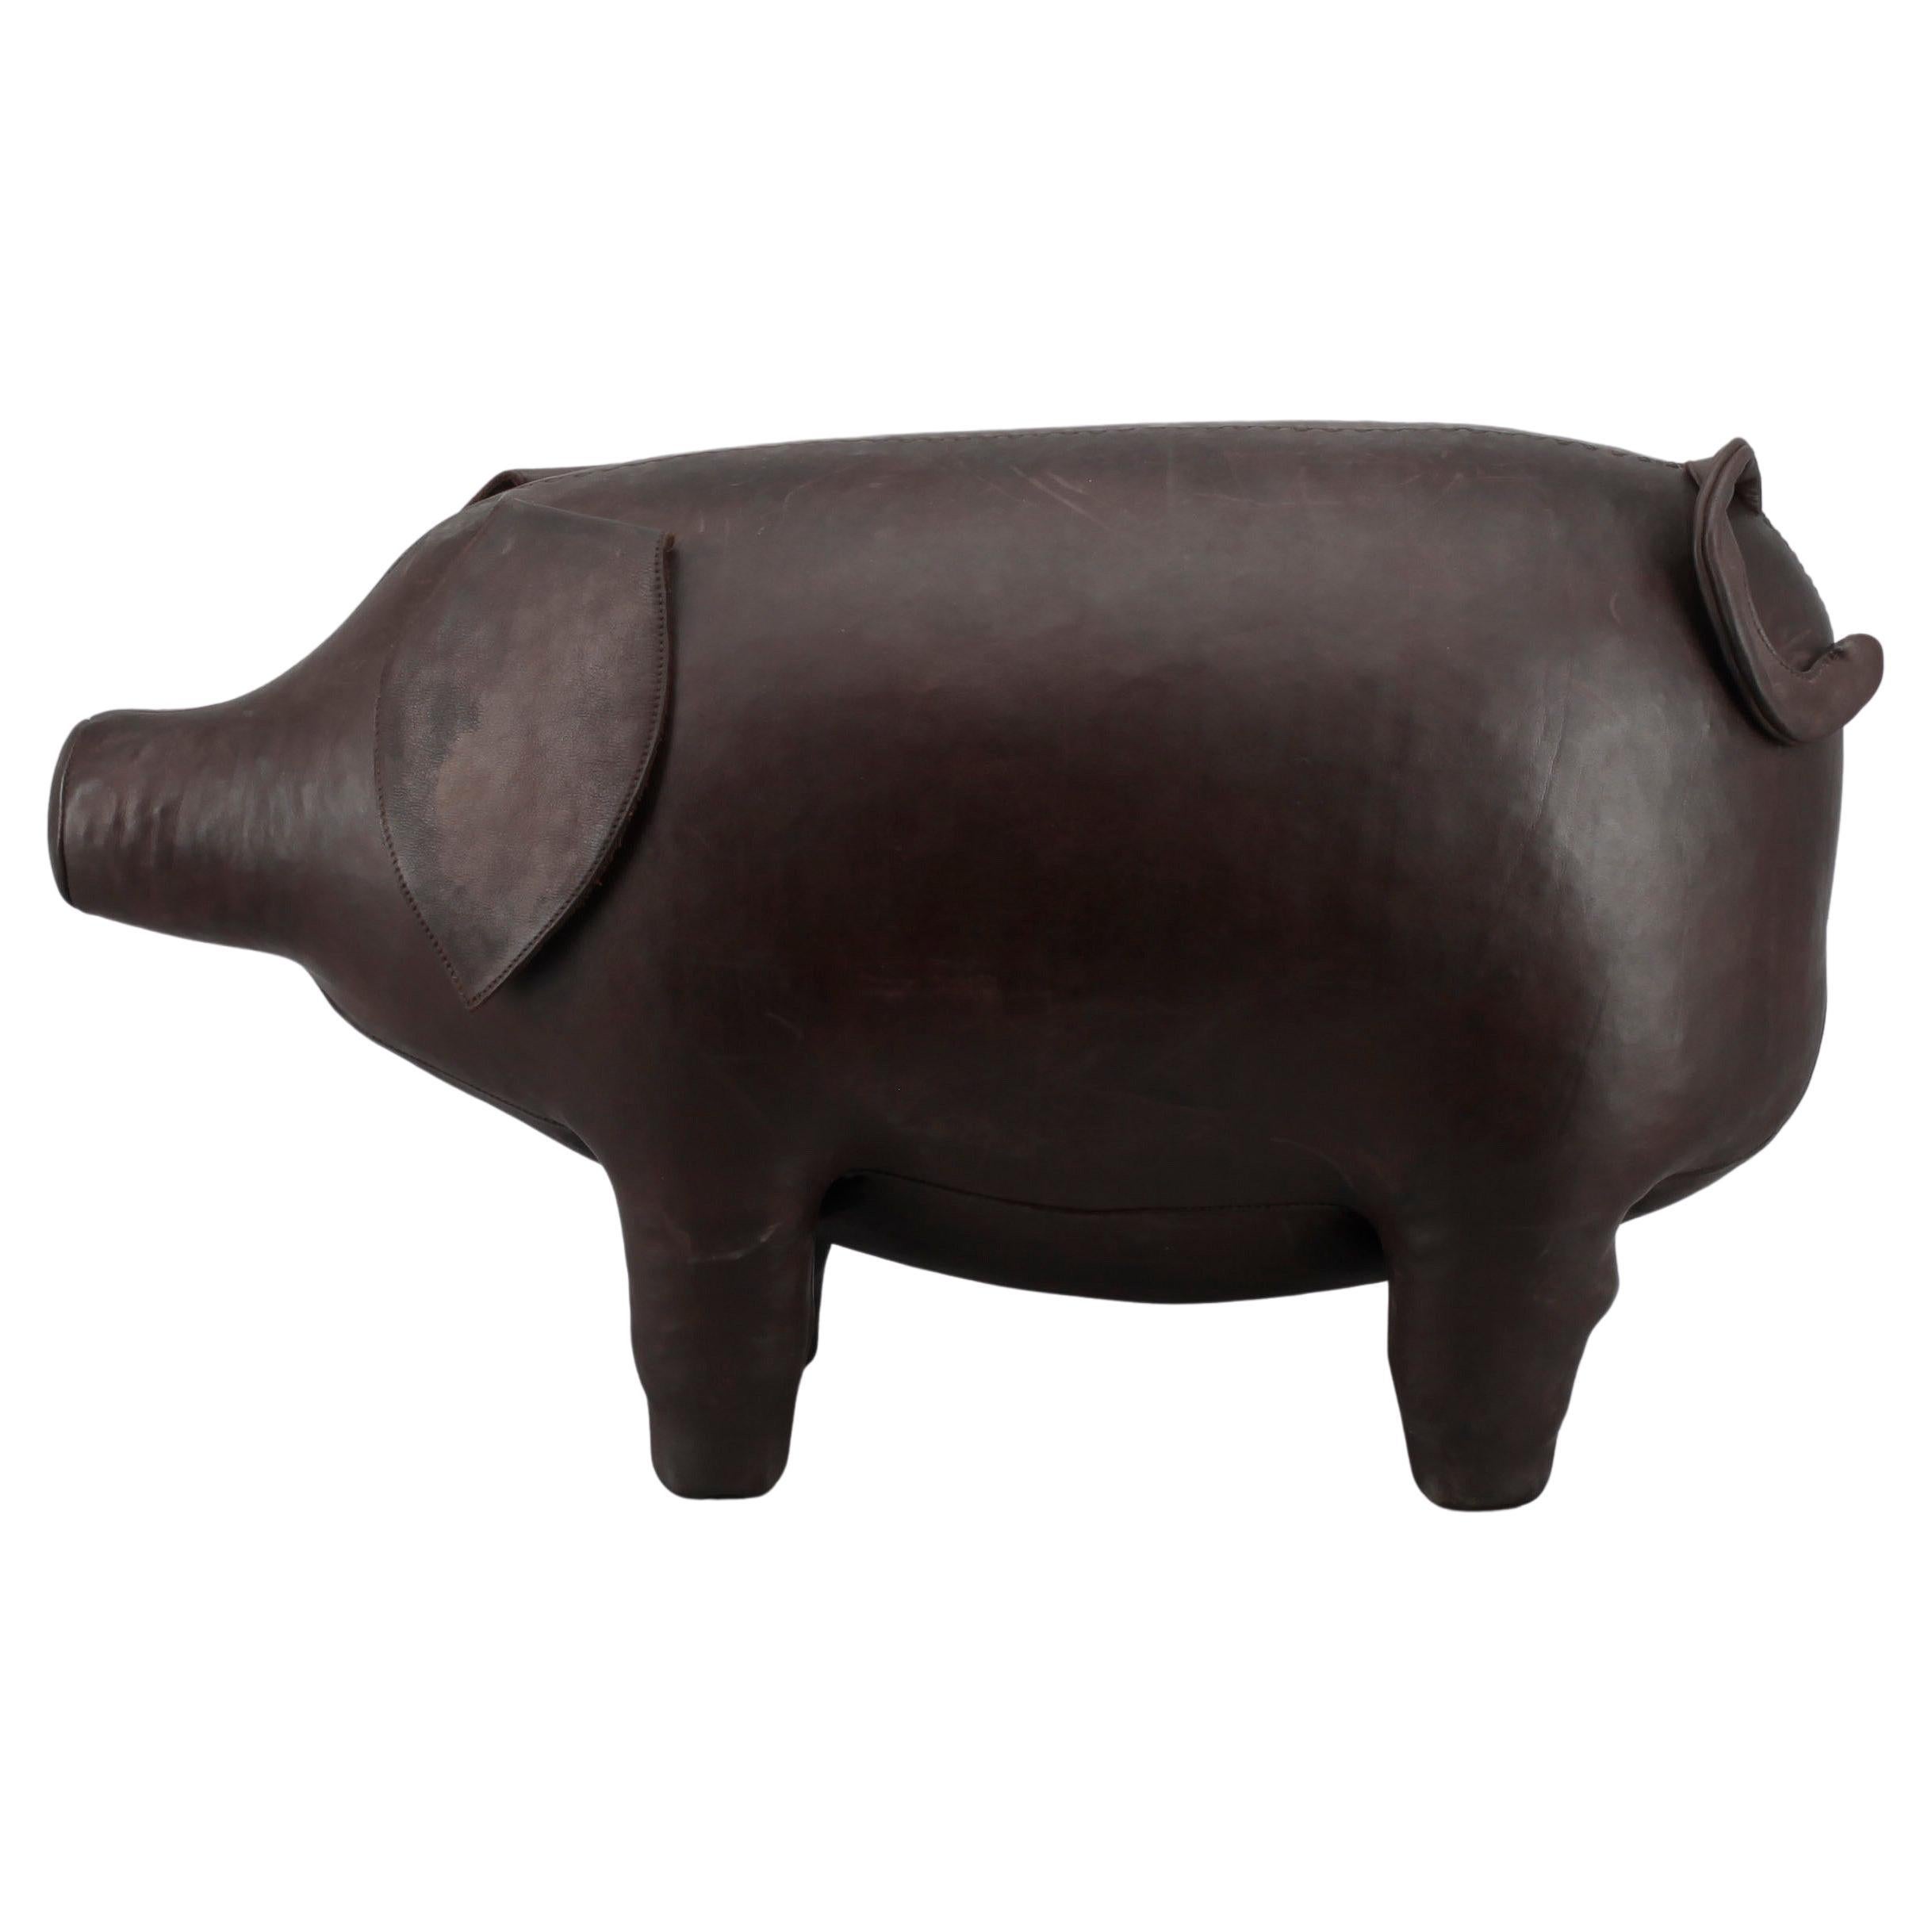 Dimitri Omersa & Co Pig in Leather for Abercrombie, England, 1980 For Sale